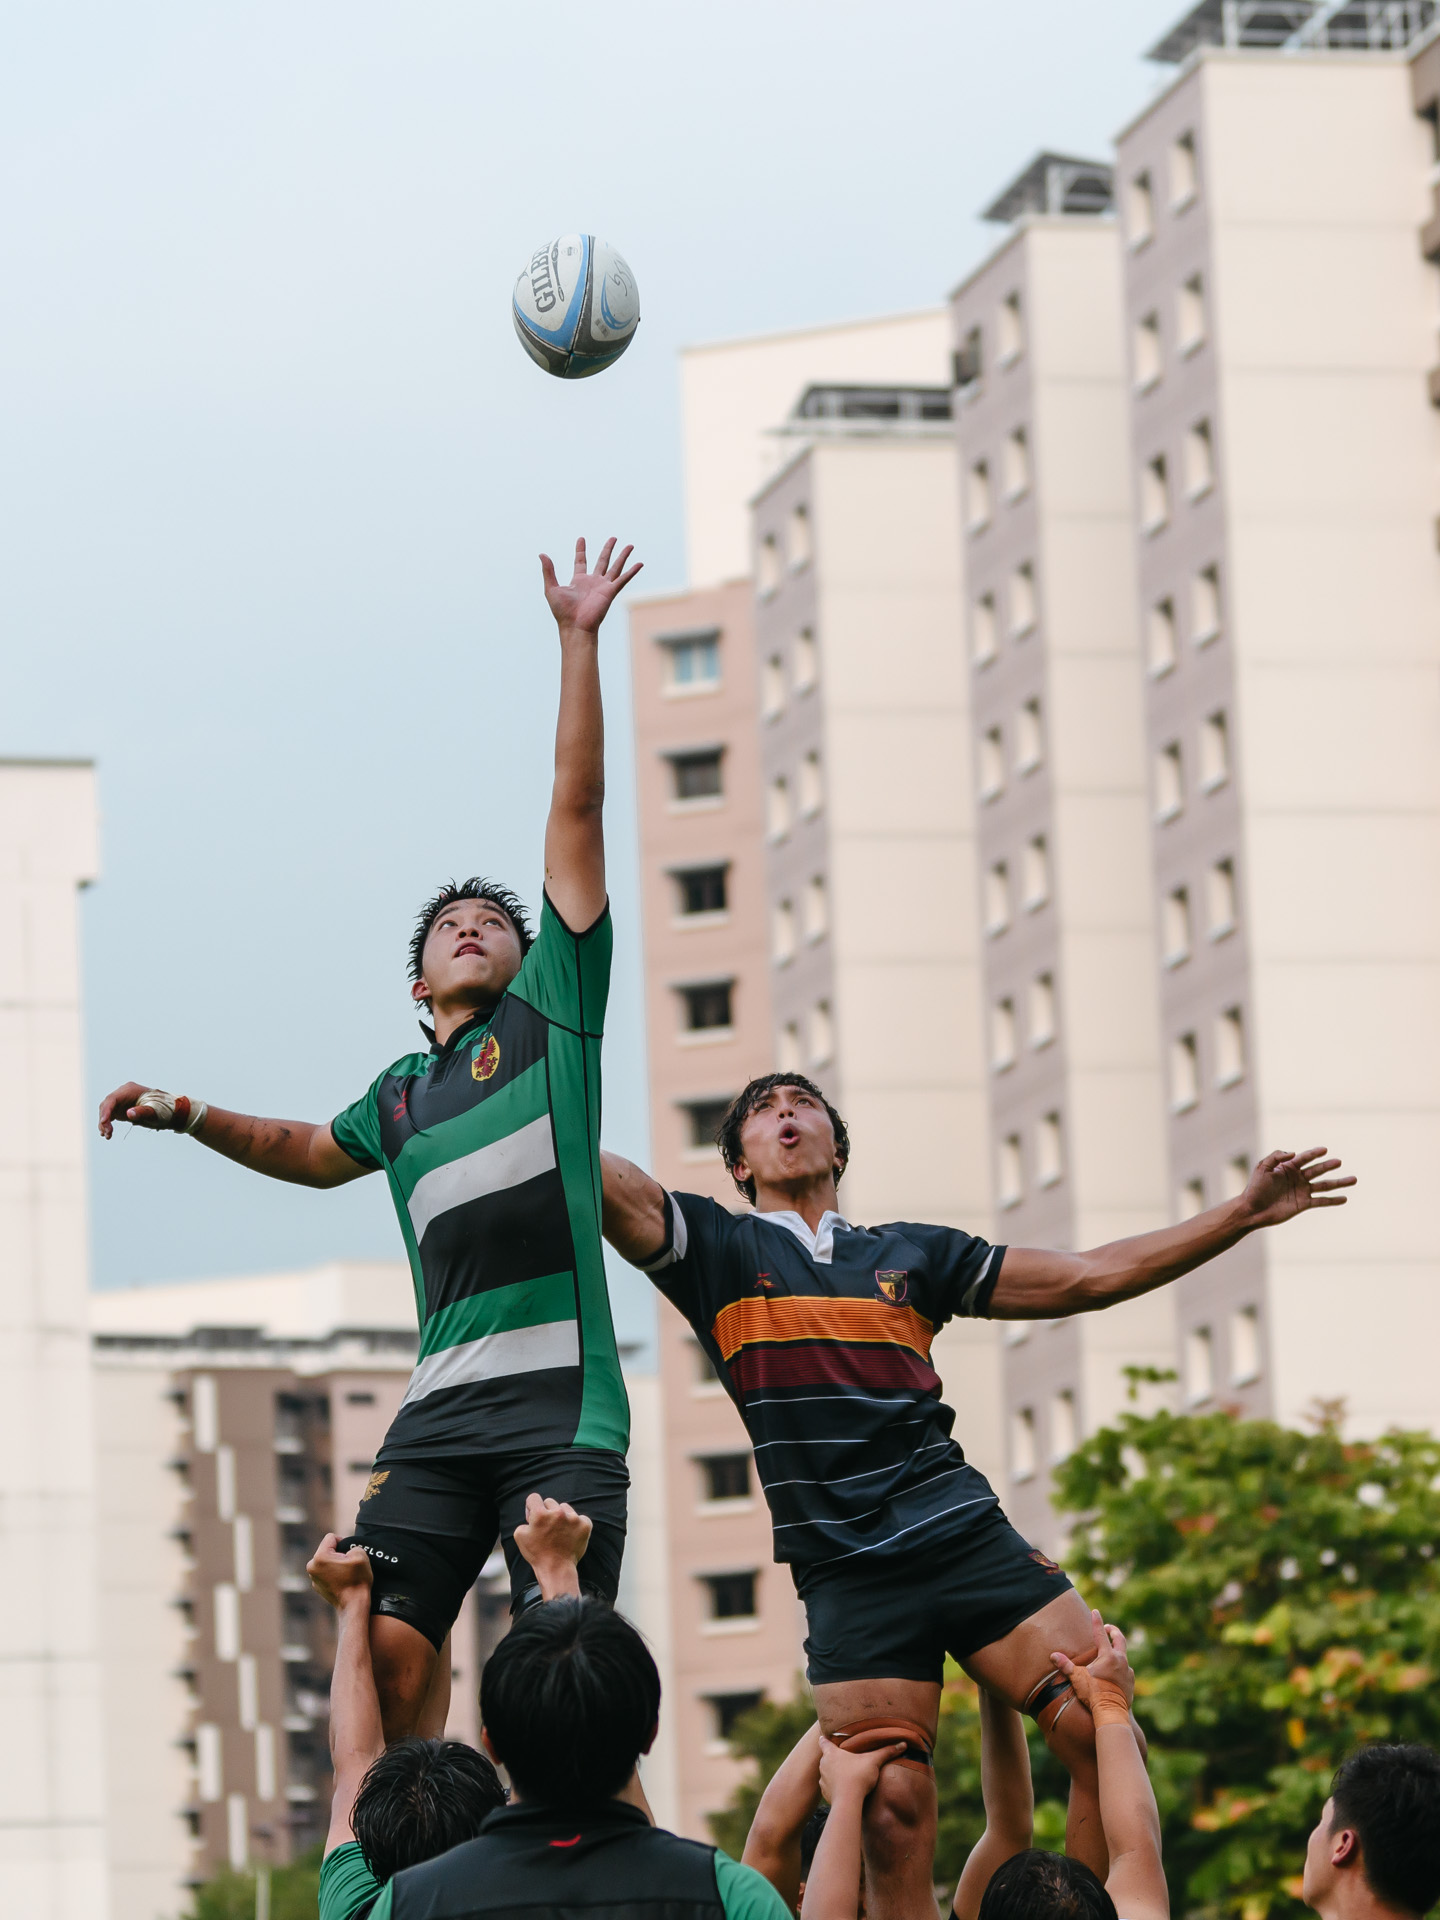 RI’s Ryan Tan (#5) competes at the lineout against his opposite, ACJC’s Lukas Andersen (#5). (Photo 16 © Joash Chow/Red Sports)